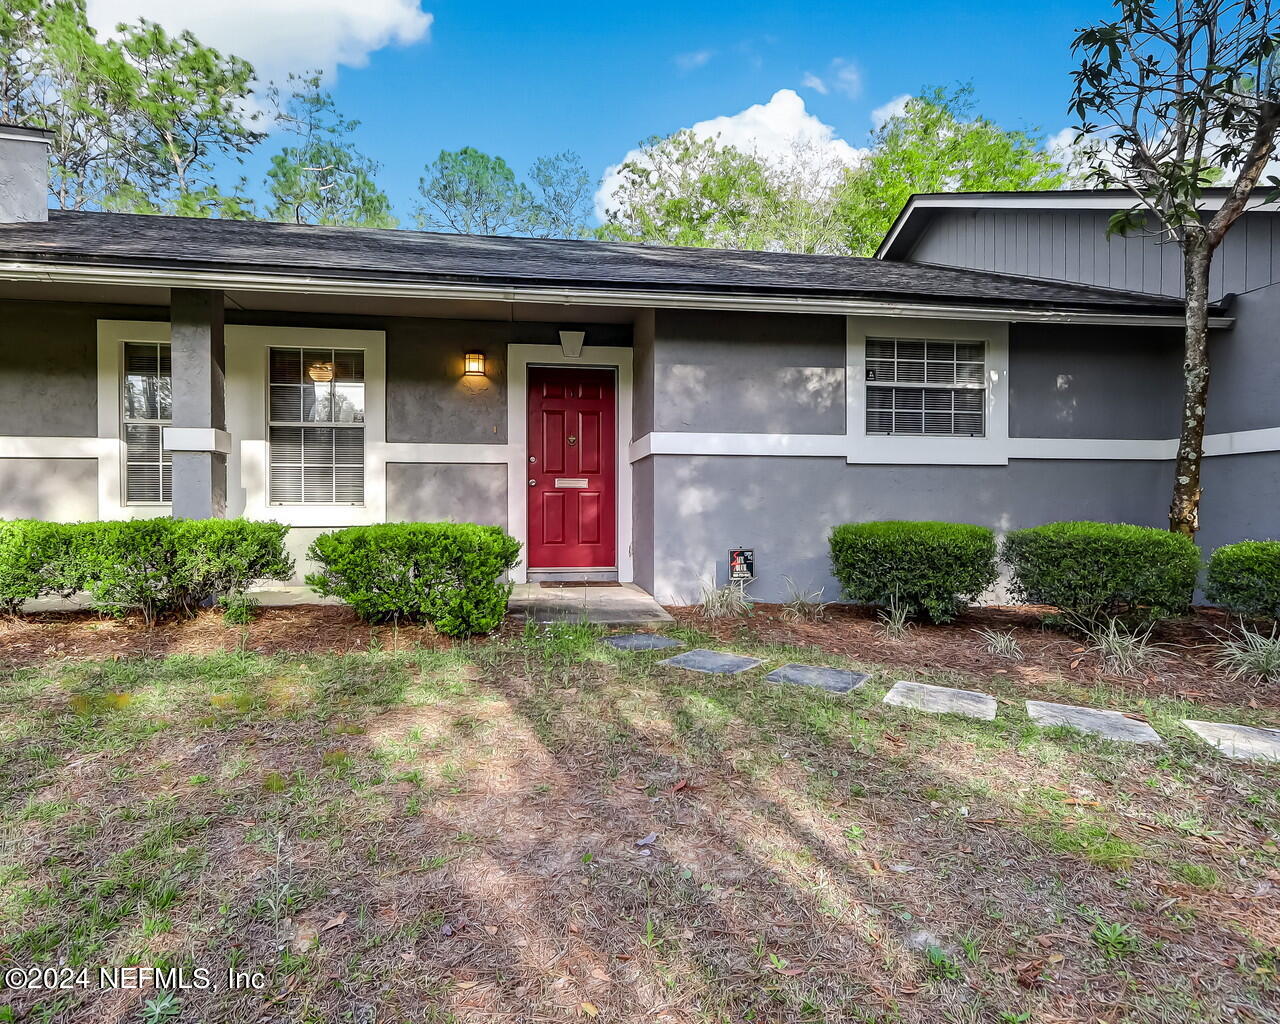 Middleburg, FL home for sale located at 16 N Dolphin Avenue, Middleburg, FL 32068